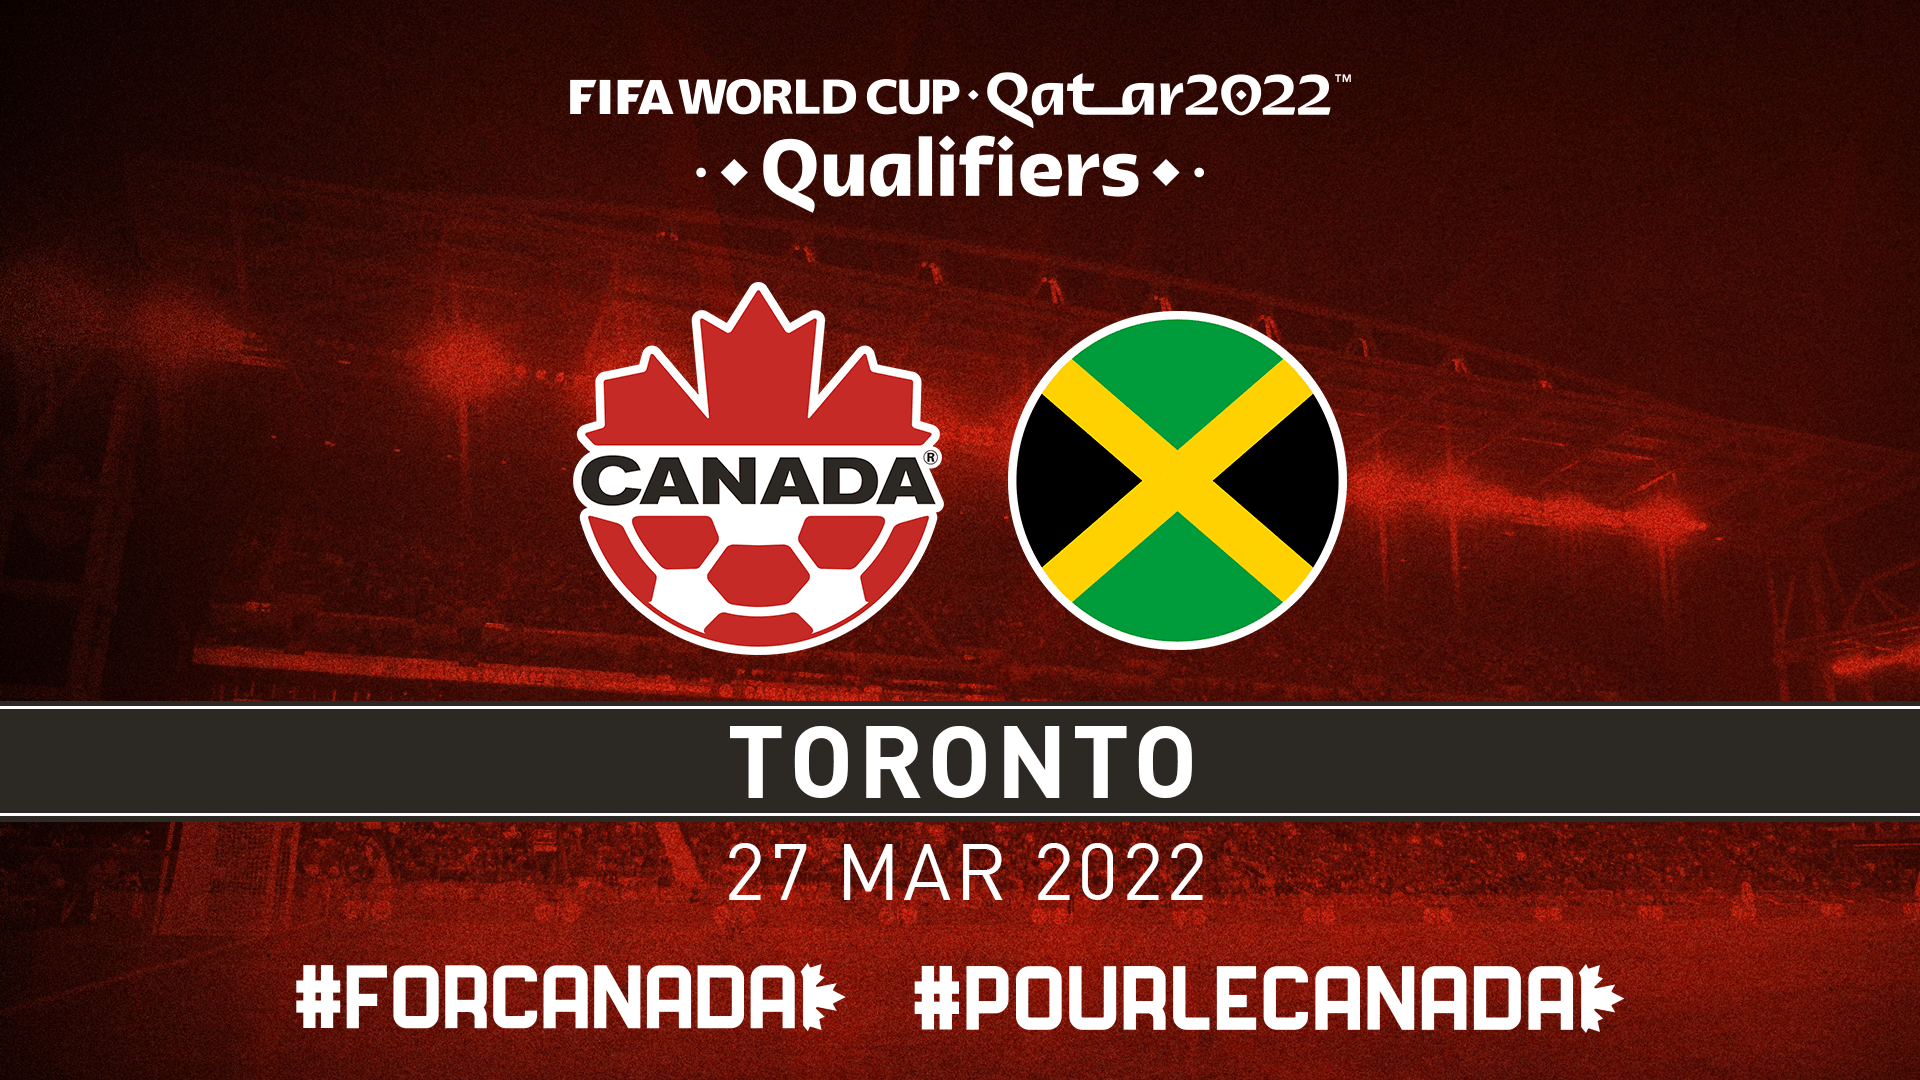 Canada returns to Toronto for all-important FIFA World Cup Qualifiers match on 27 March